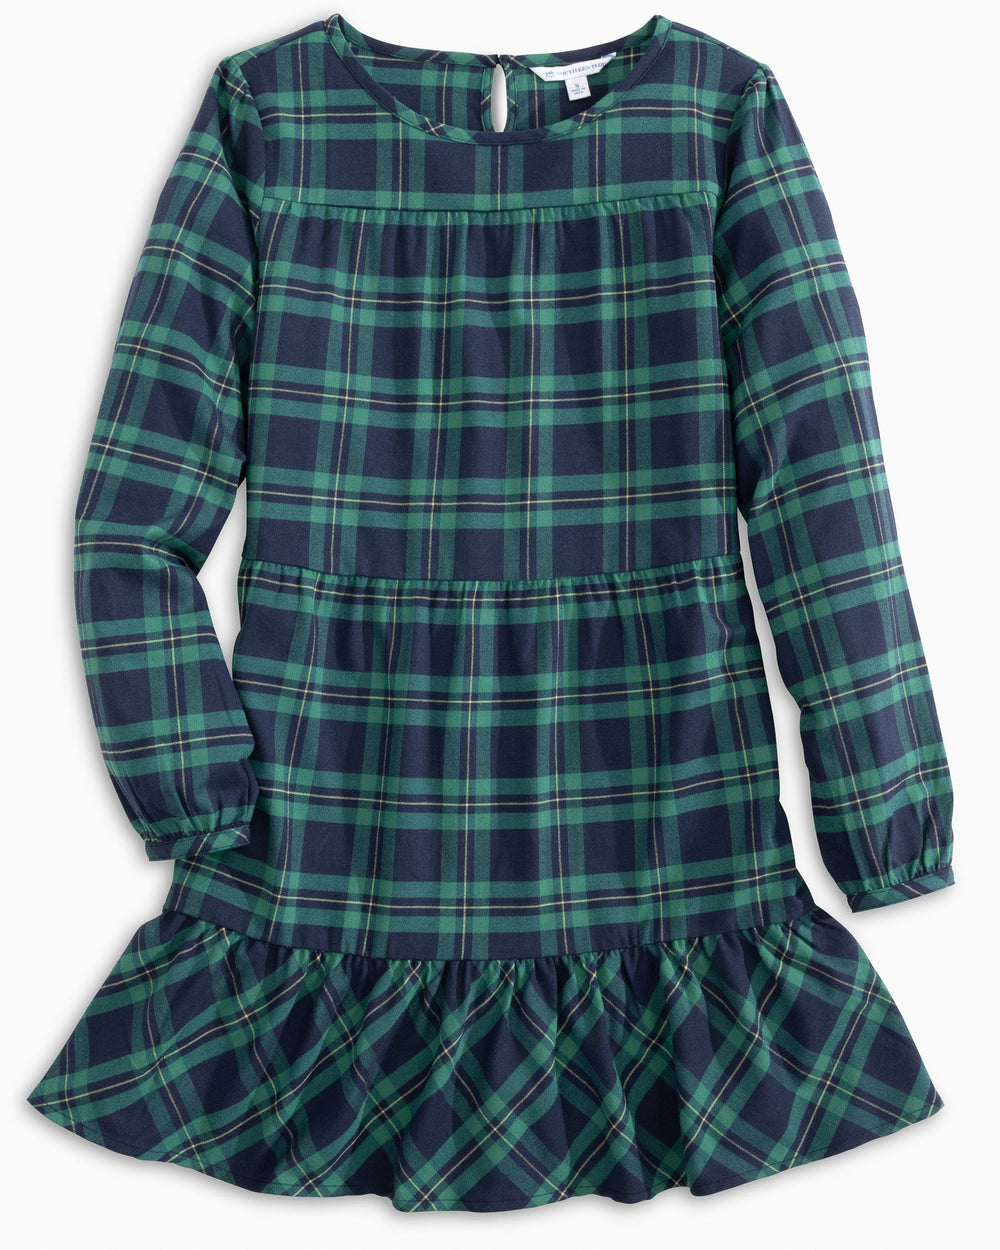 The flat front of the Women's Nadia Flannel Intercoastal Dress by Southern Tide - Evening Emerald